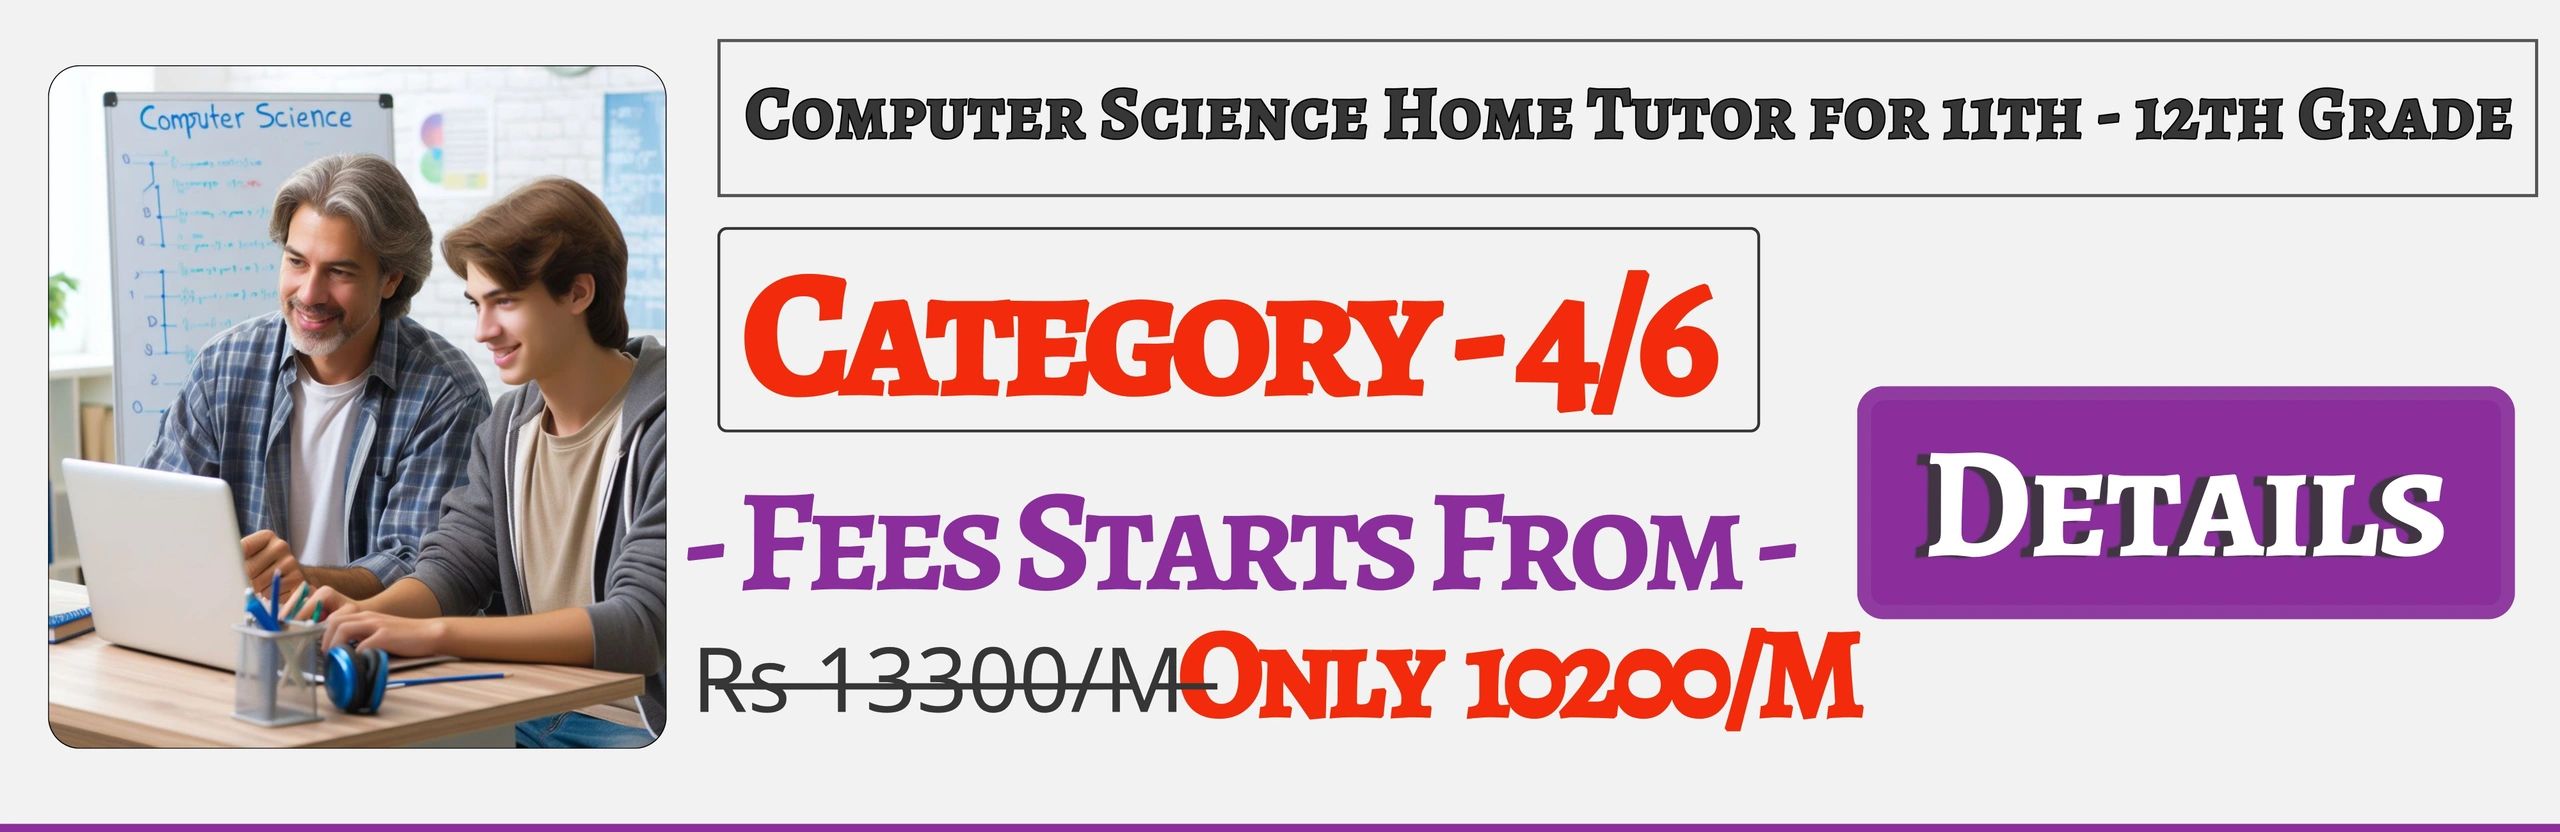 Book Best Nearby Computer Science Home Tuition Tutors For 11th & 12th In Jaipur , Fees Only 10200/M